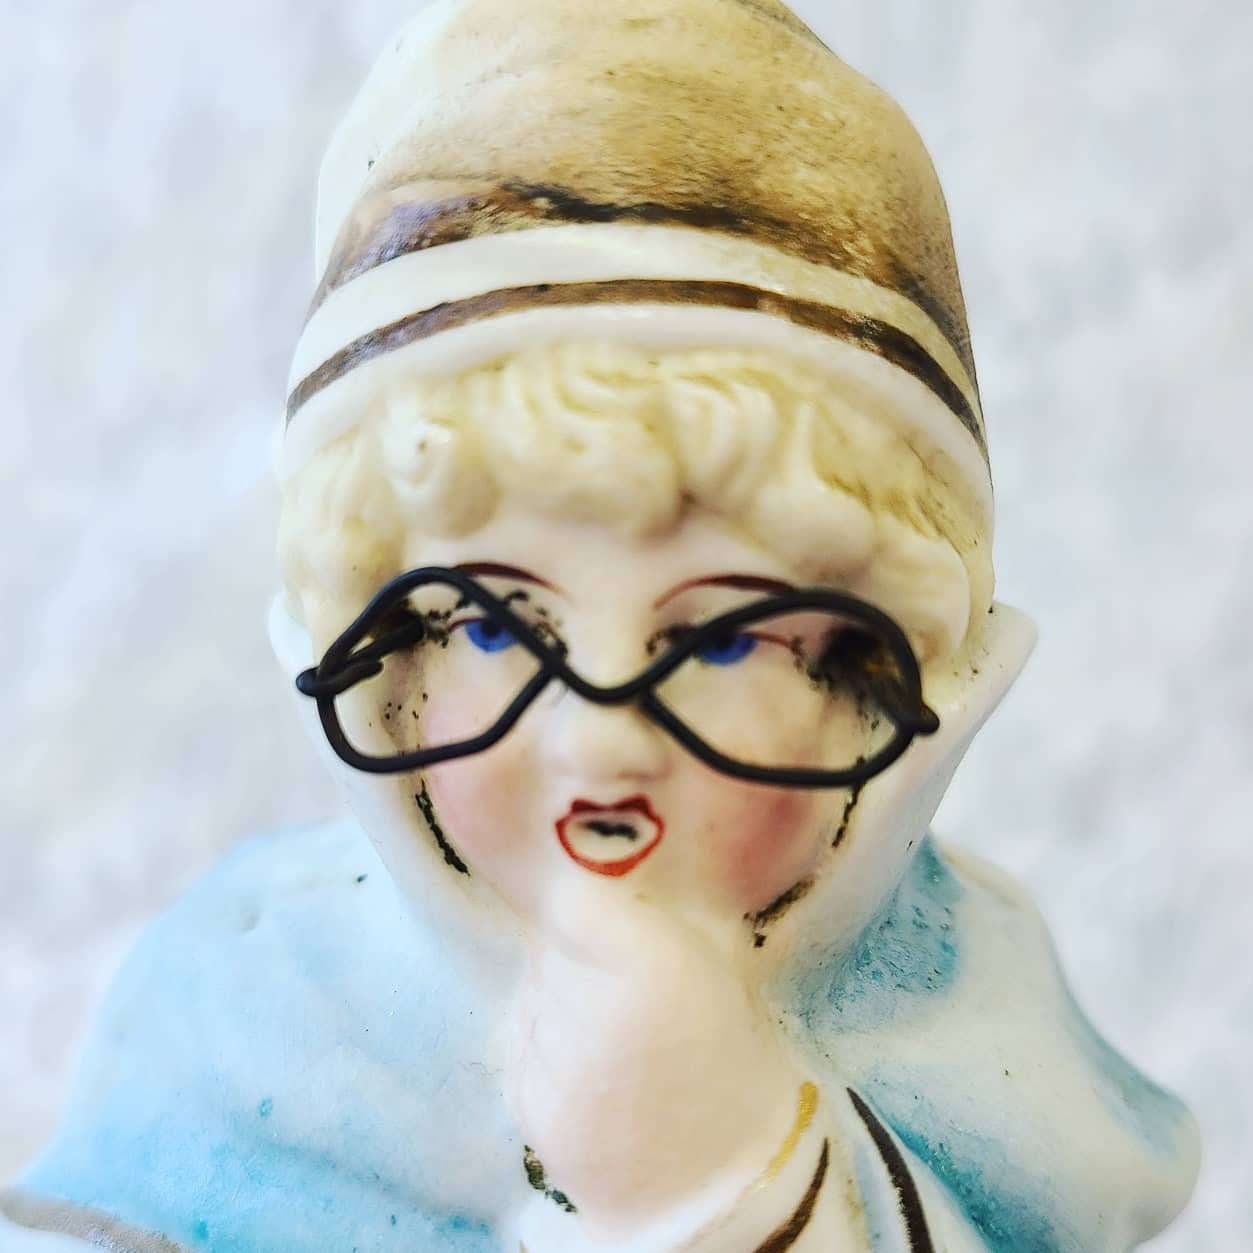 Antique German Boy Figurine 7" Bisque with Applied Metal Glasses